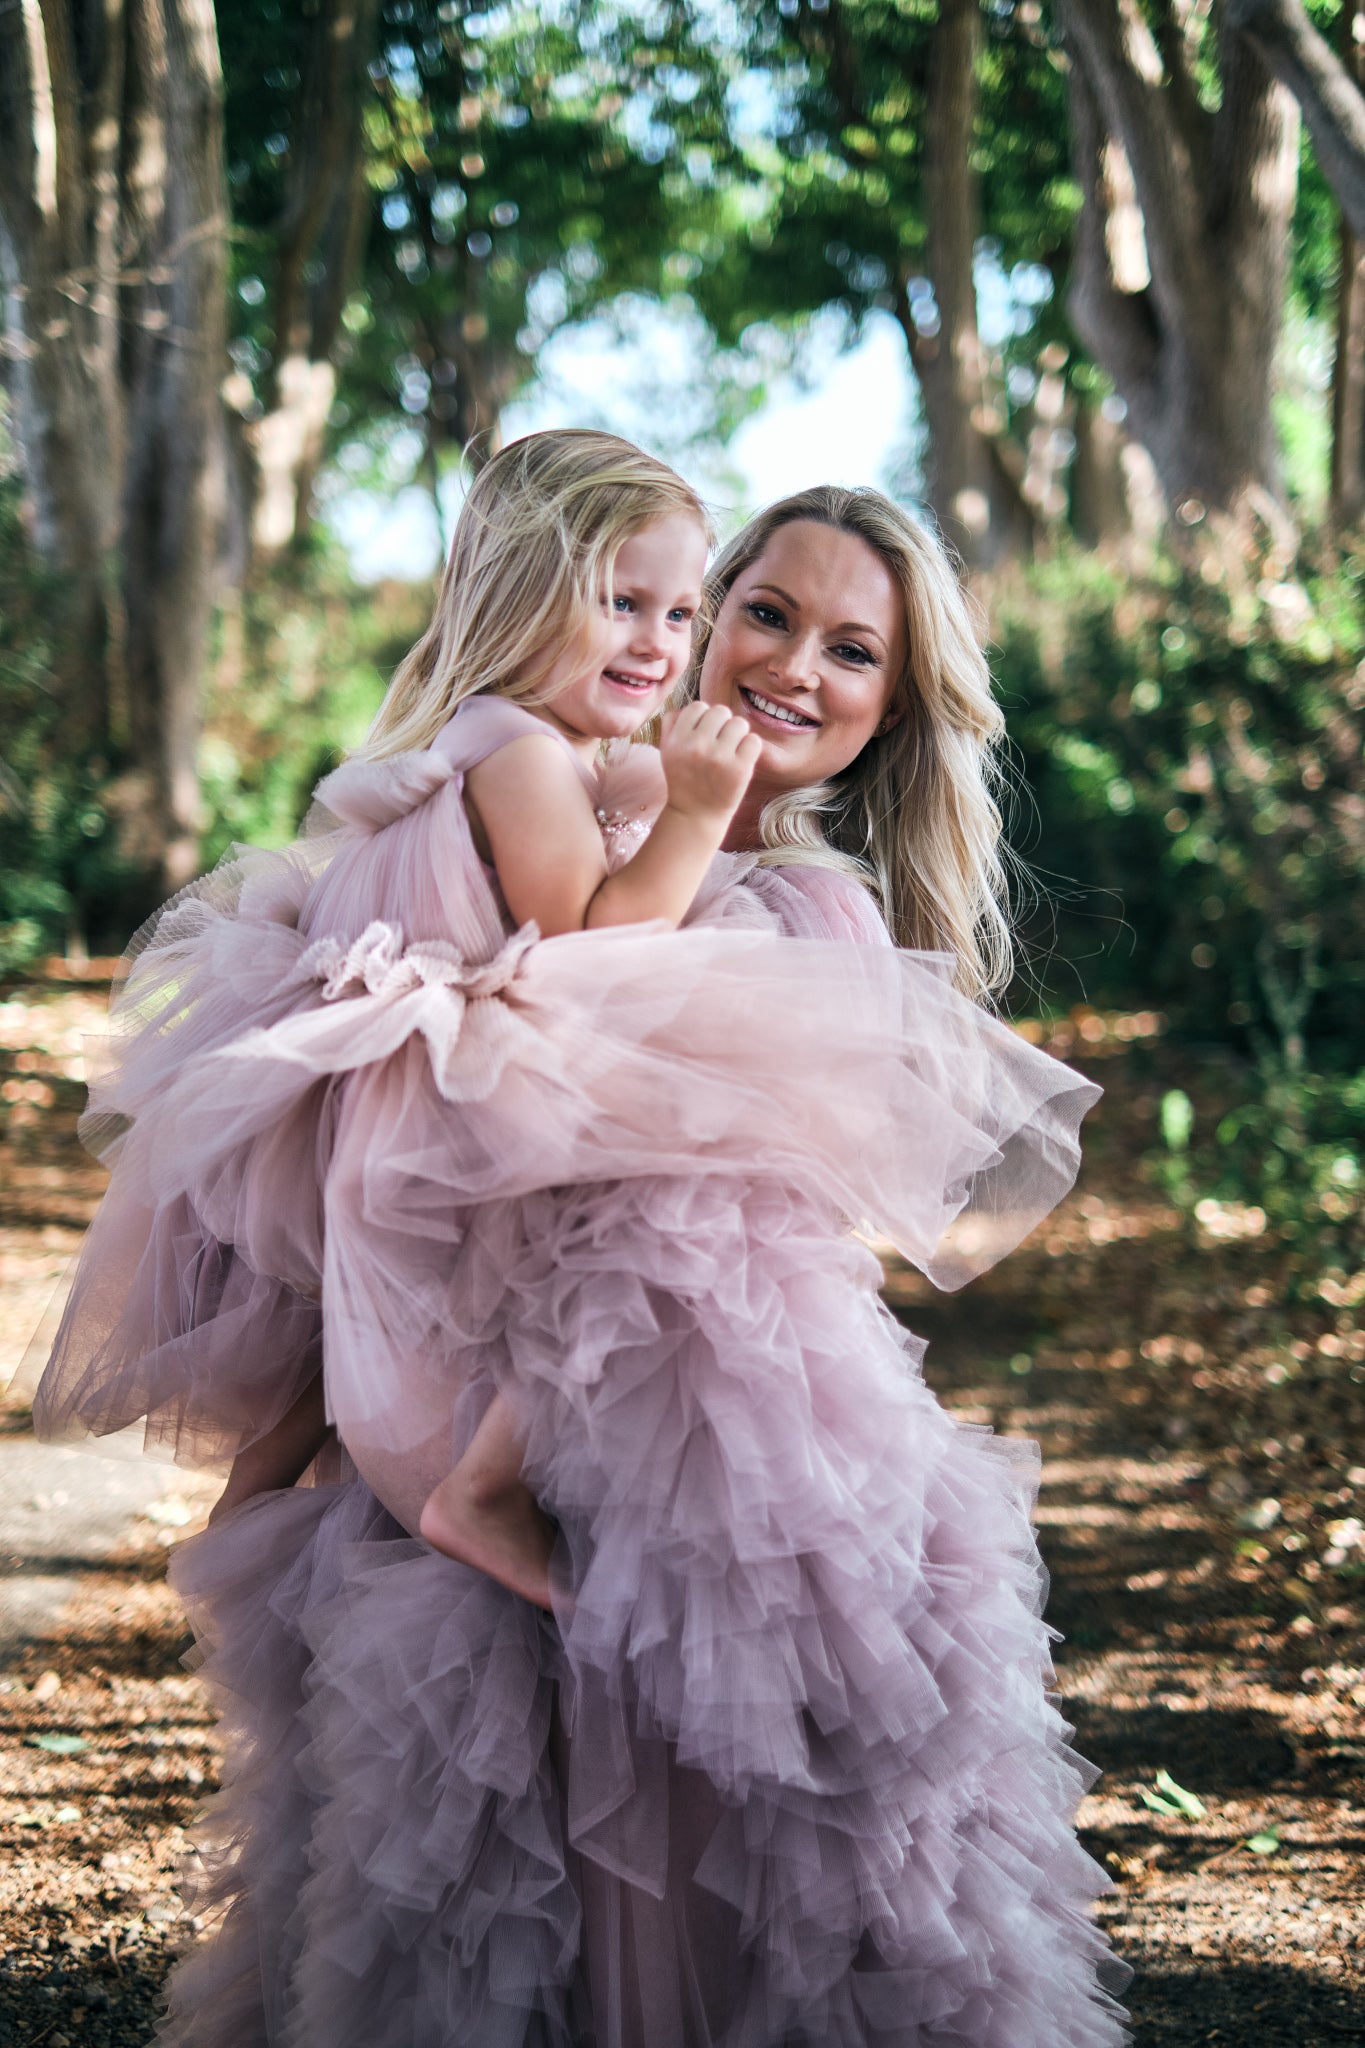 Mauve Mommy and Me Tulle Gown Flower Girl Dress Maternity Gown for Pho –  reathua